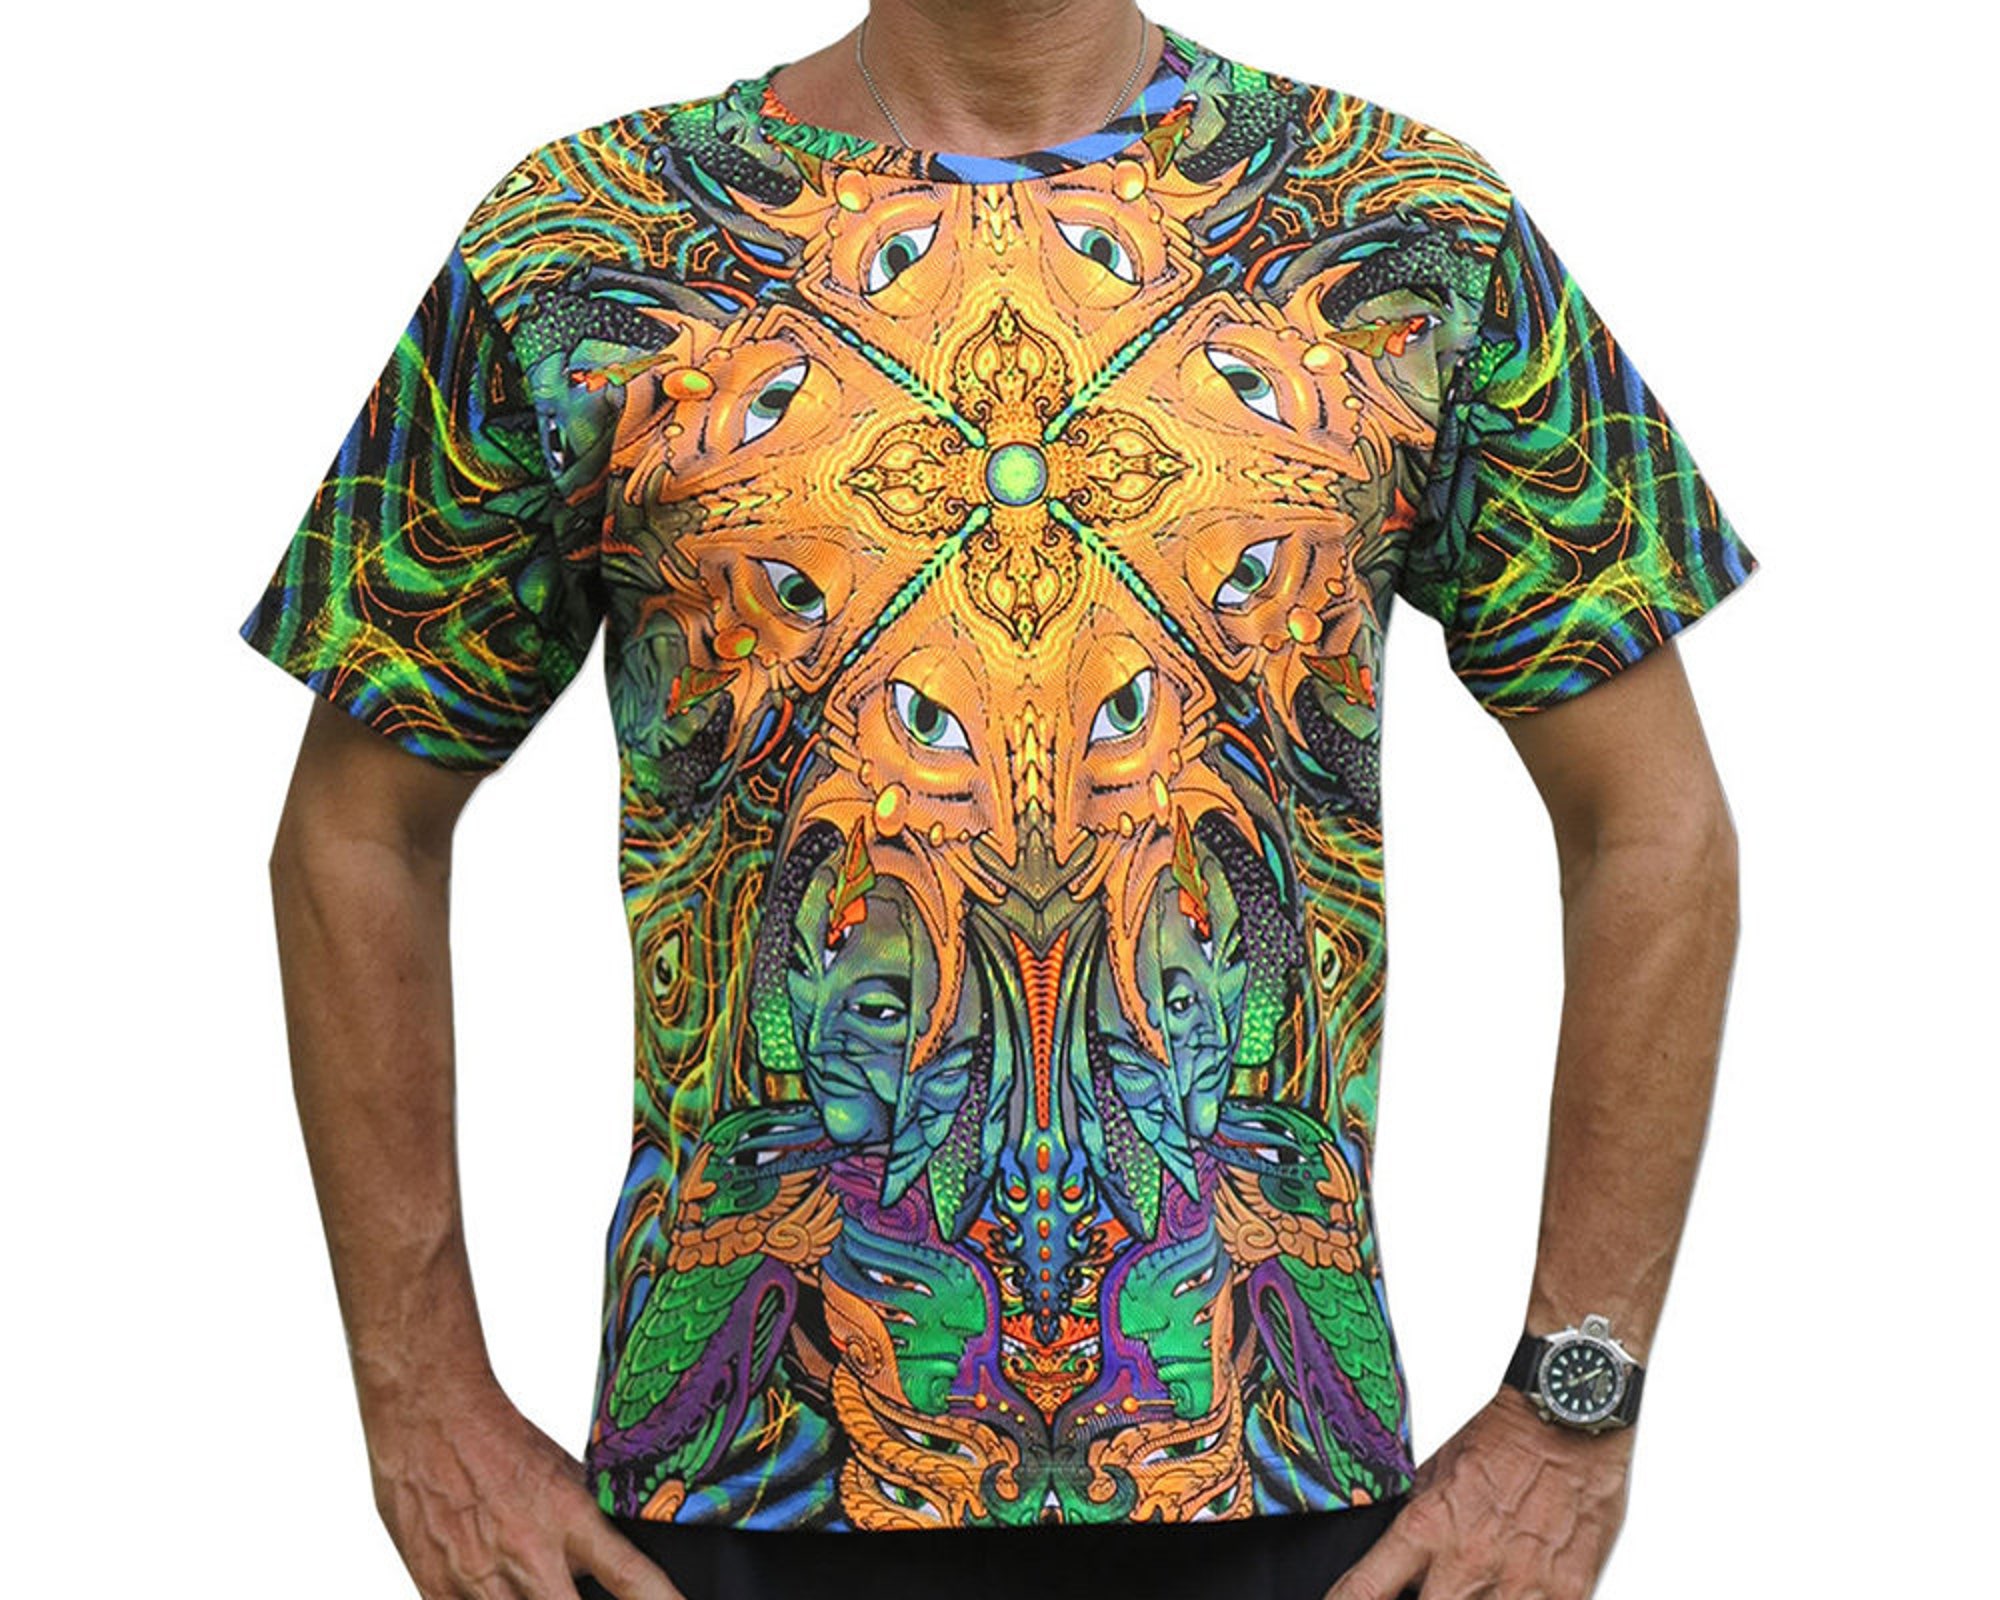 Discover Psychedelic Polymorph Goa UV Active Psy Trance Festival T Shirt 3D